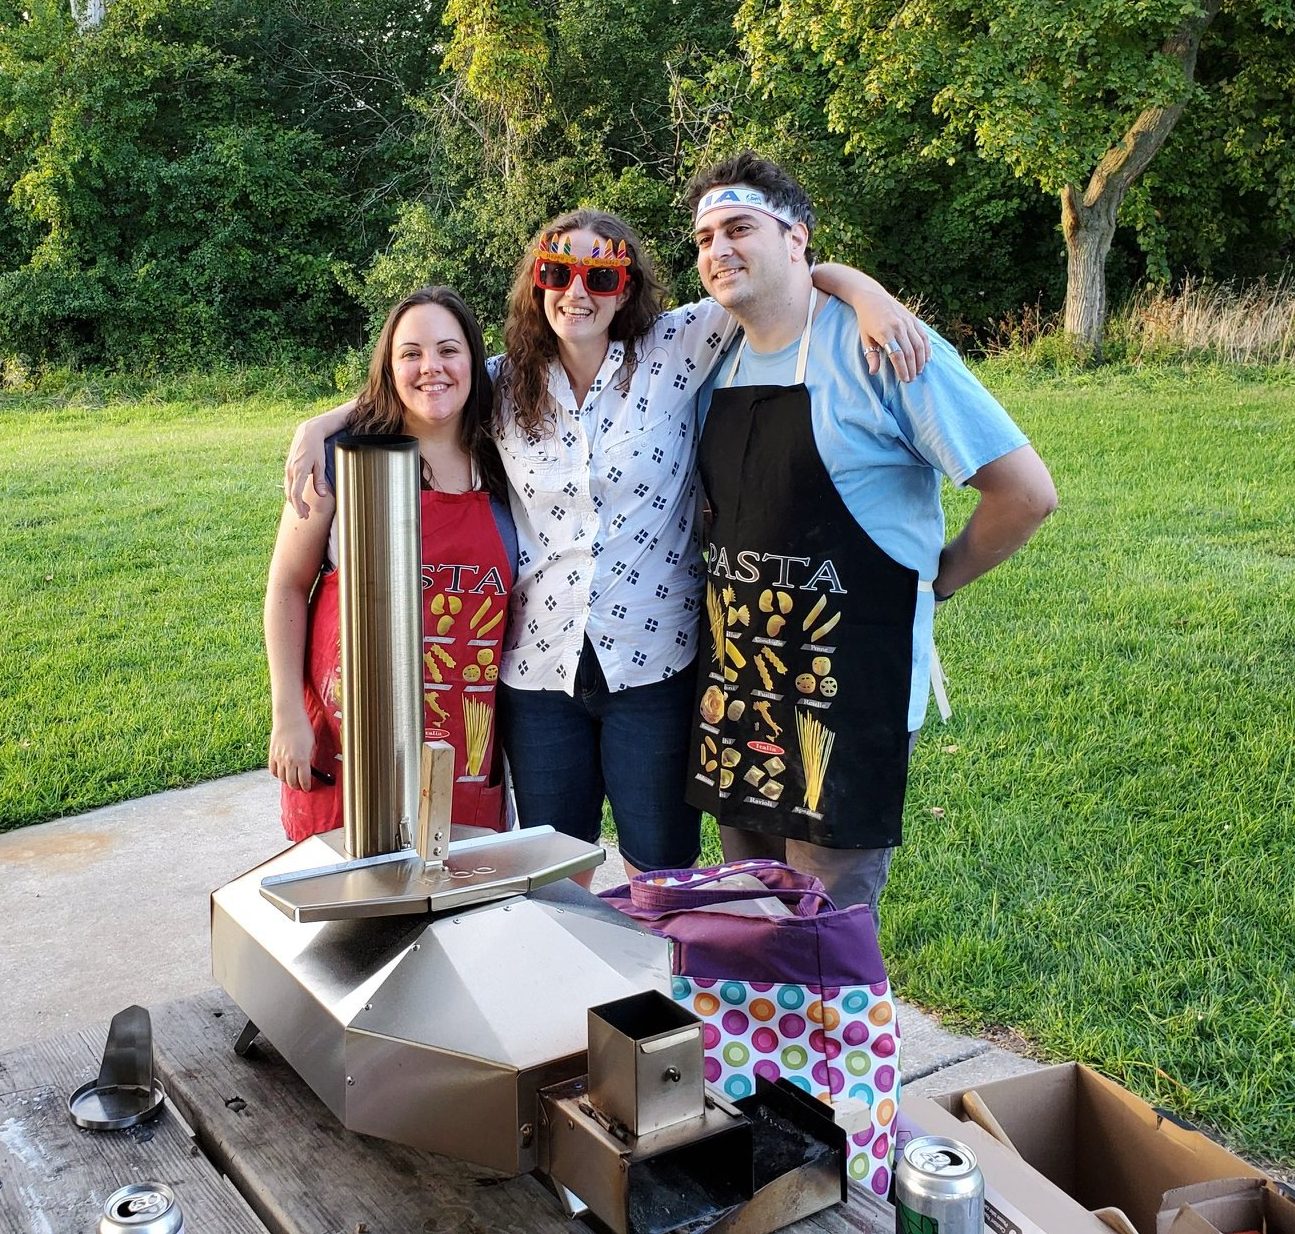 September 14 Surprise 40th Pizza Farm at Bunker Hill Forest Preserve